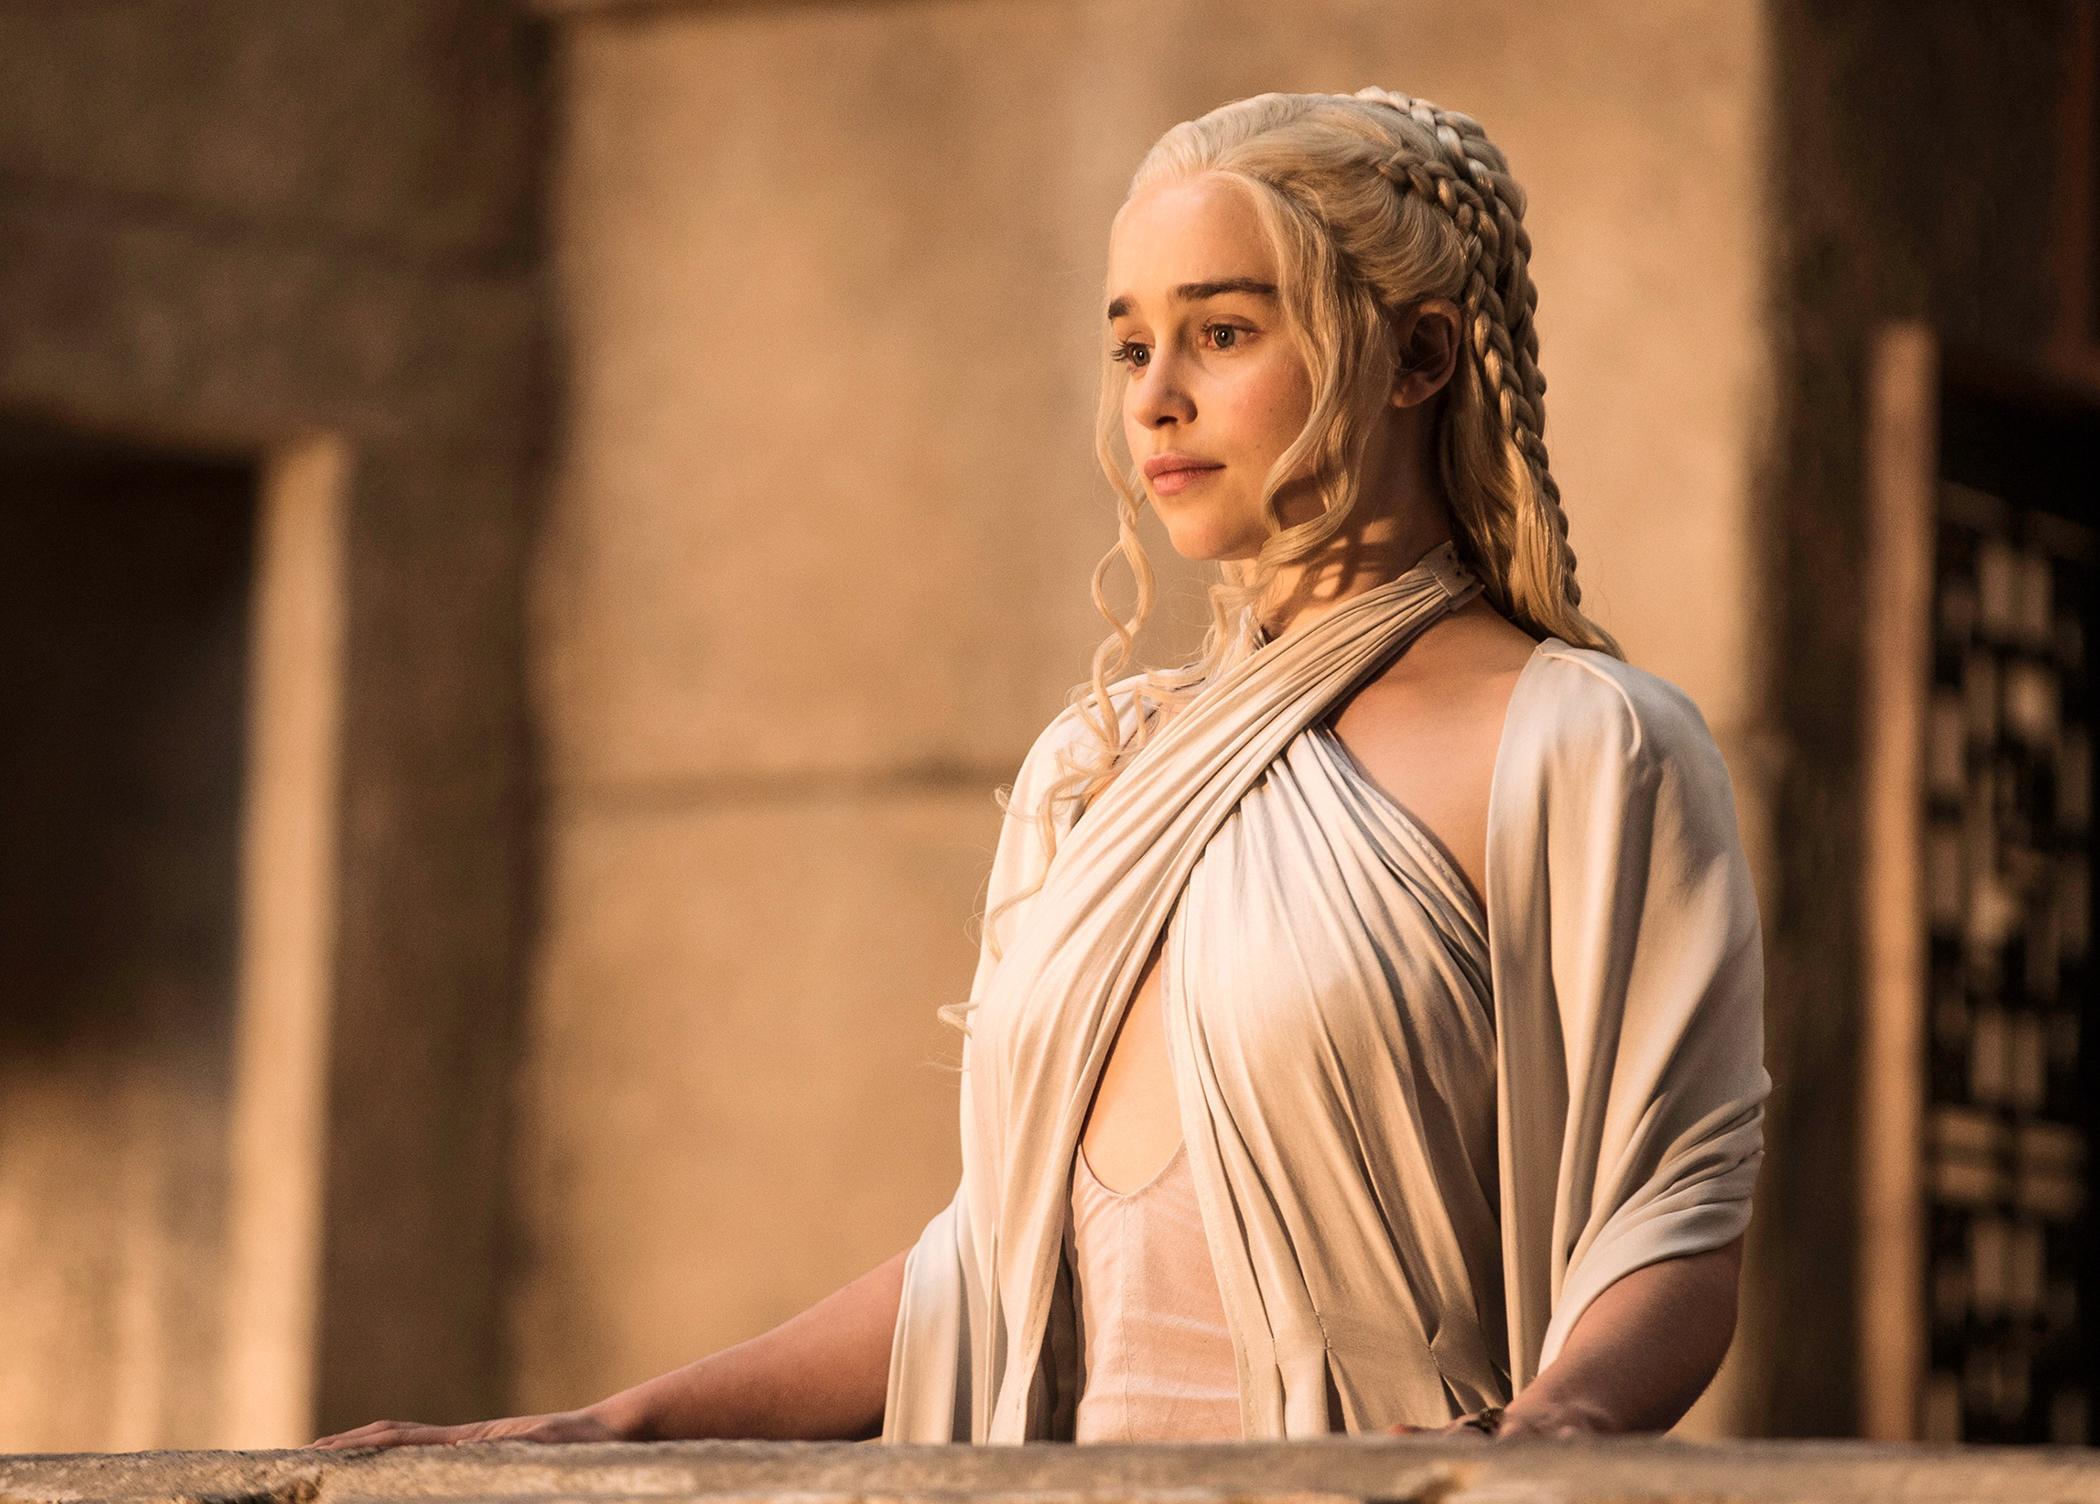 Emilia Clarke in “Game of Thrones” on HBO (Macall B. Polay—HBO/courtesy Everett Collection)